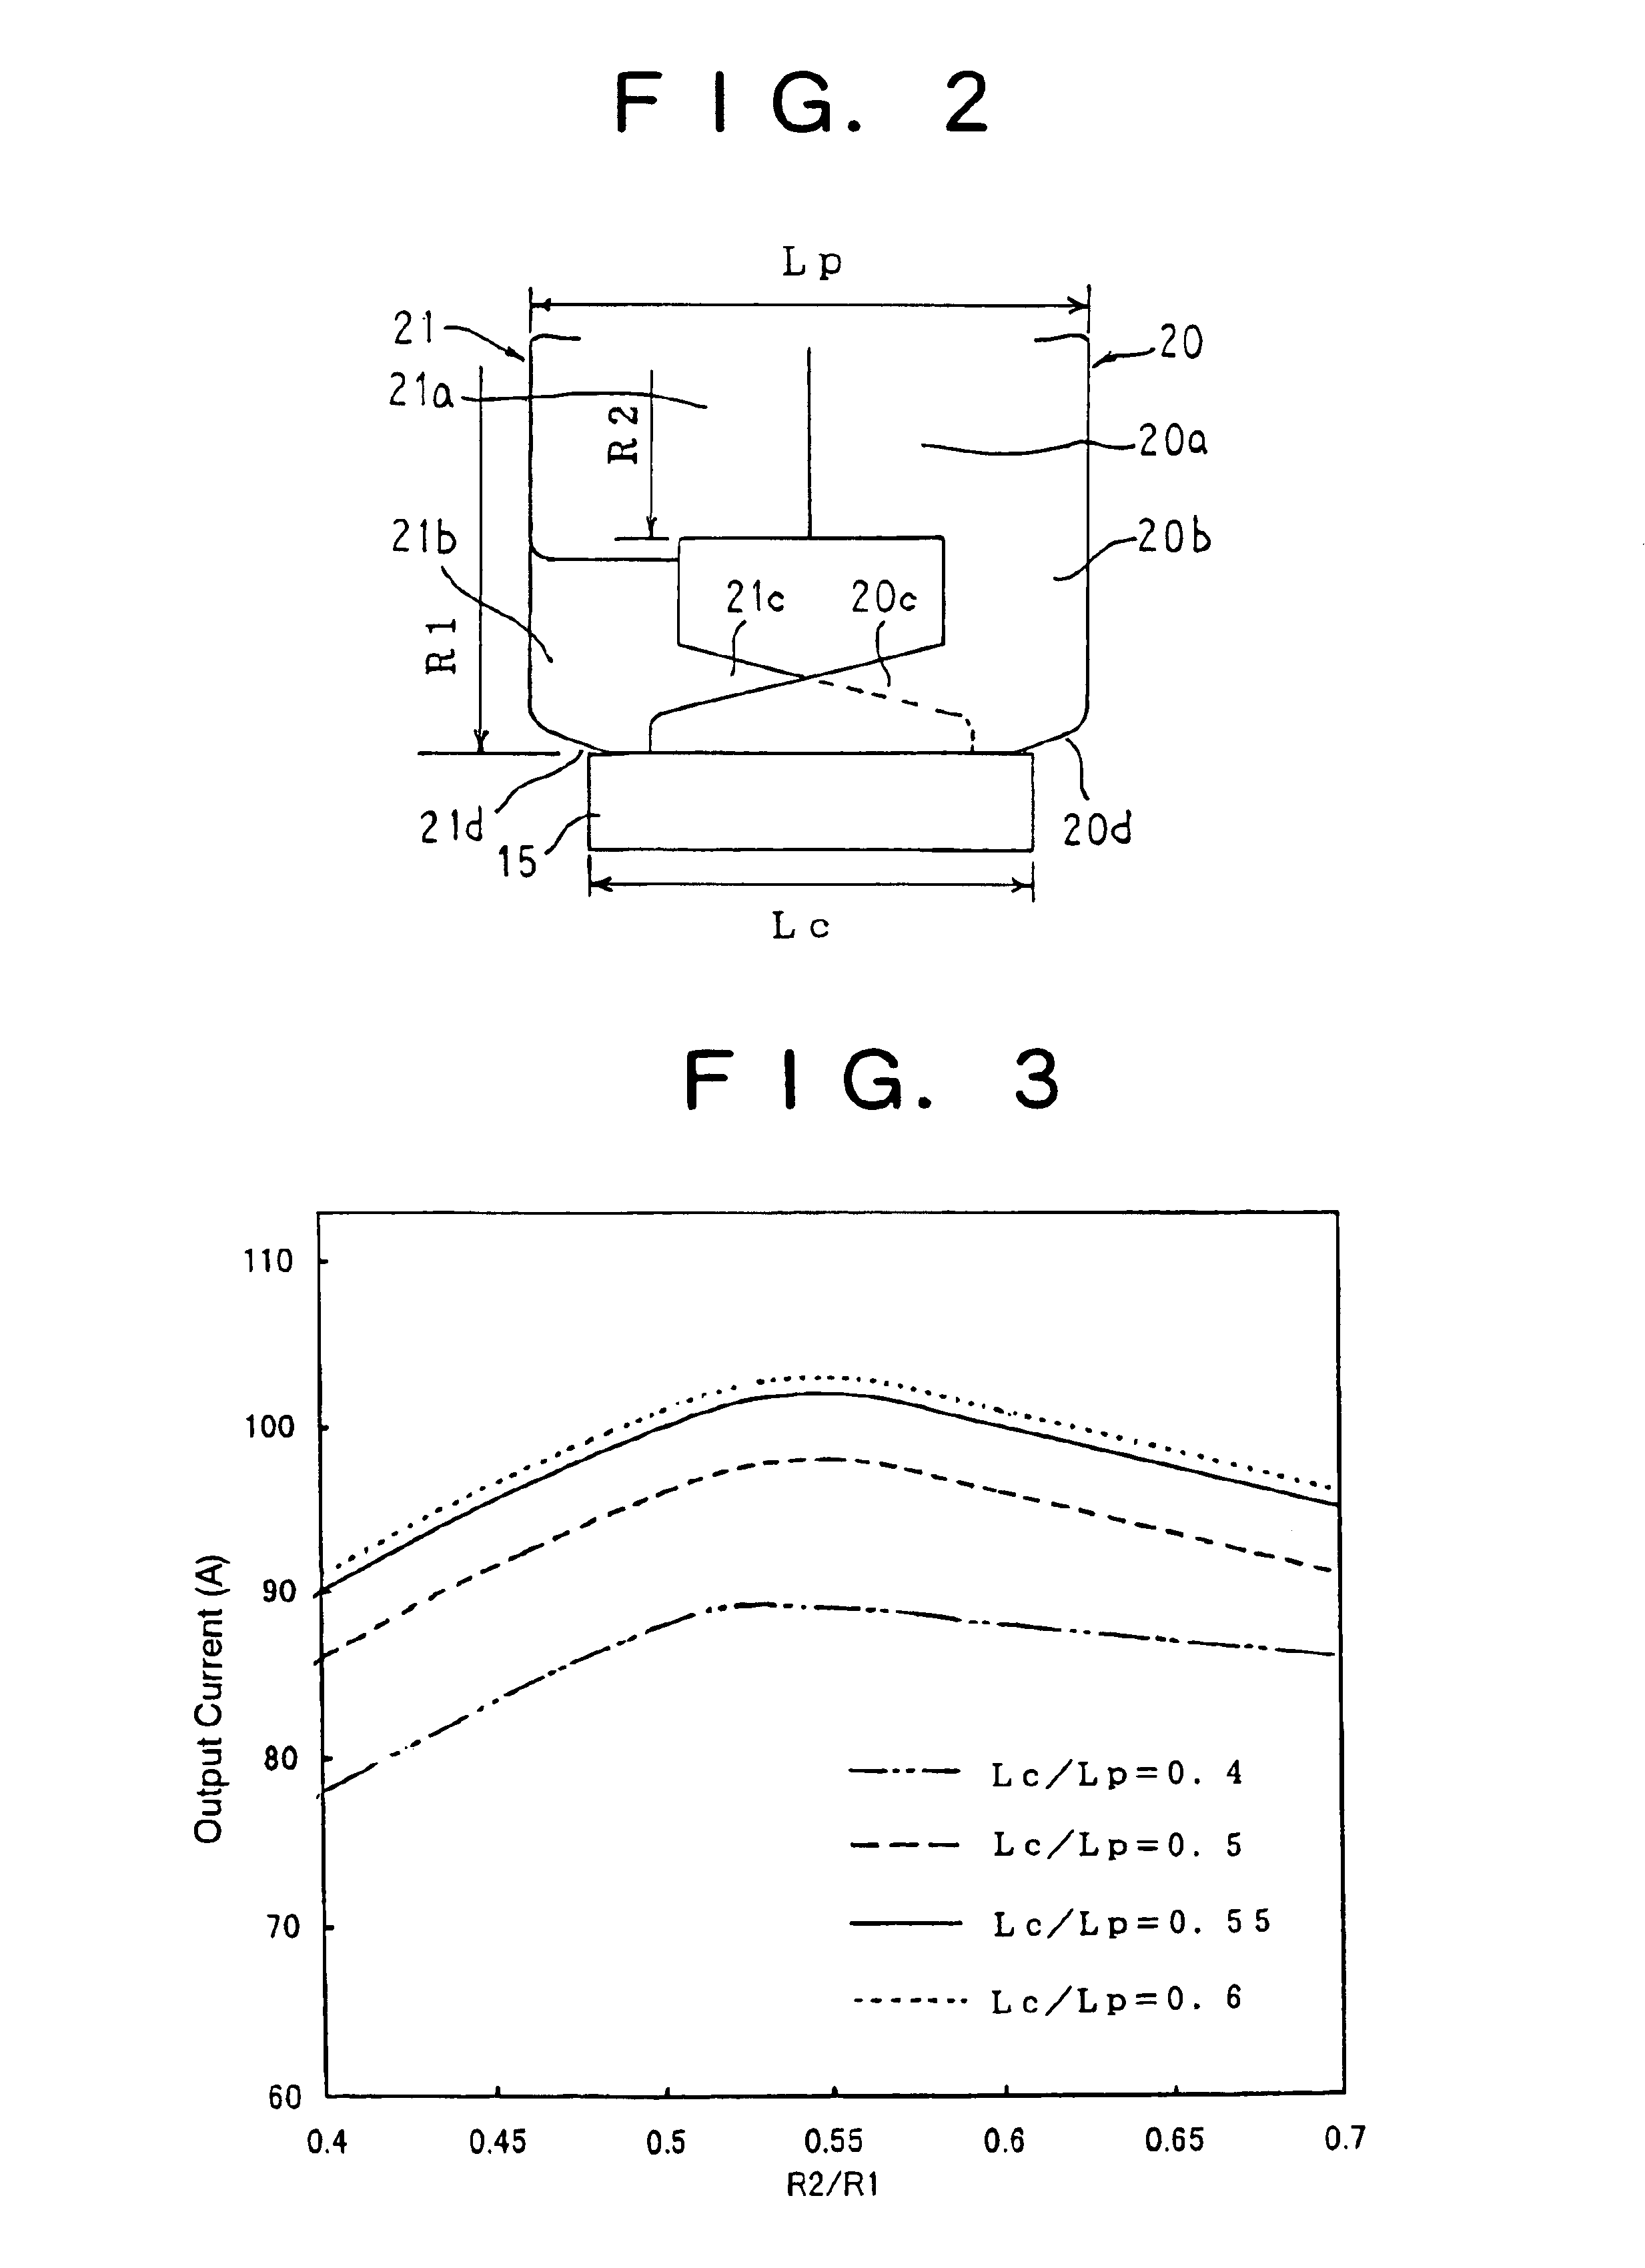 Ac generator for vehicle